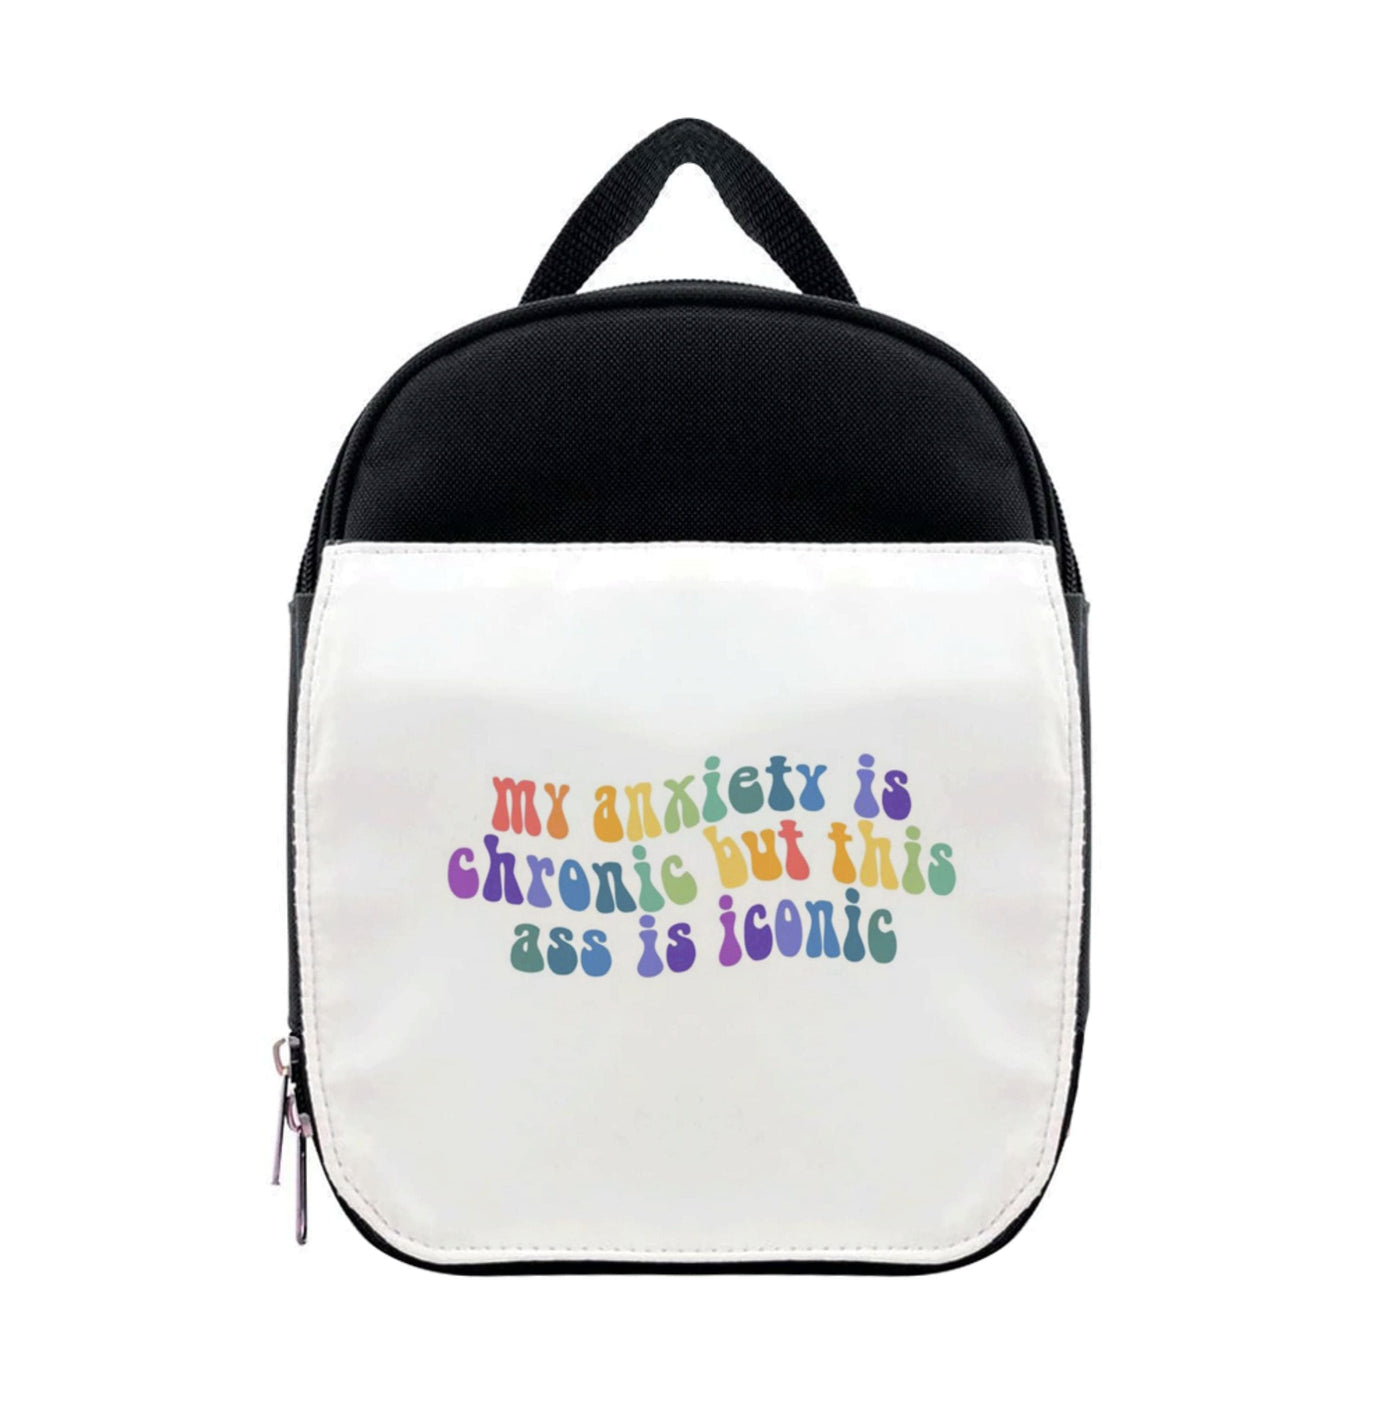 My Anxiety Is Chronic But This Ass Is Iconic - TikTok Lunchbox